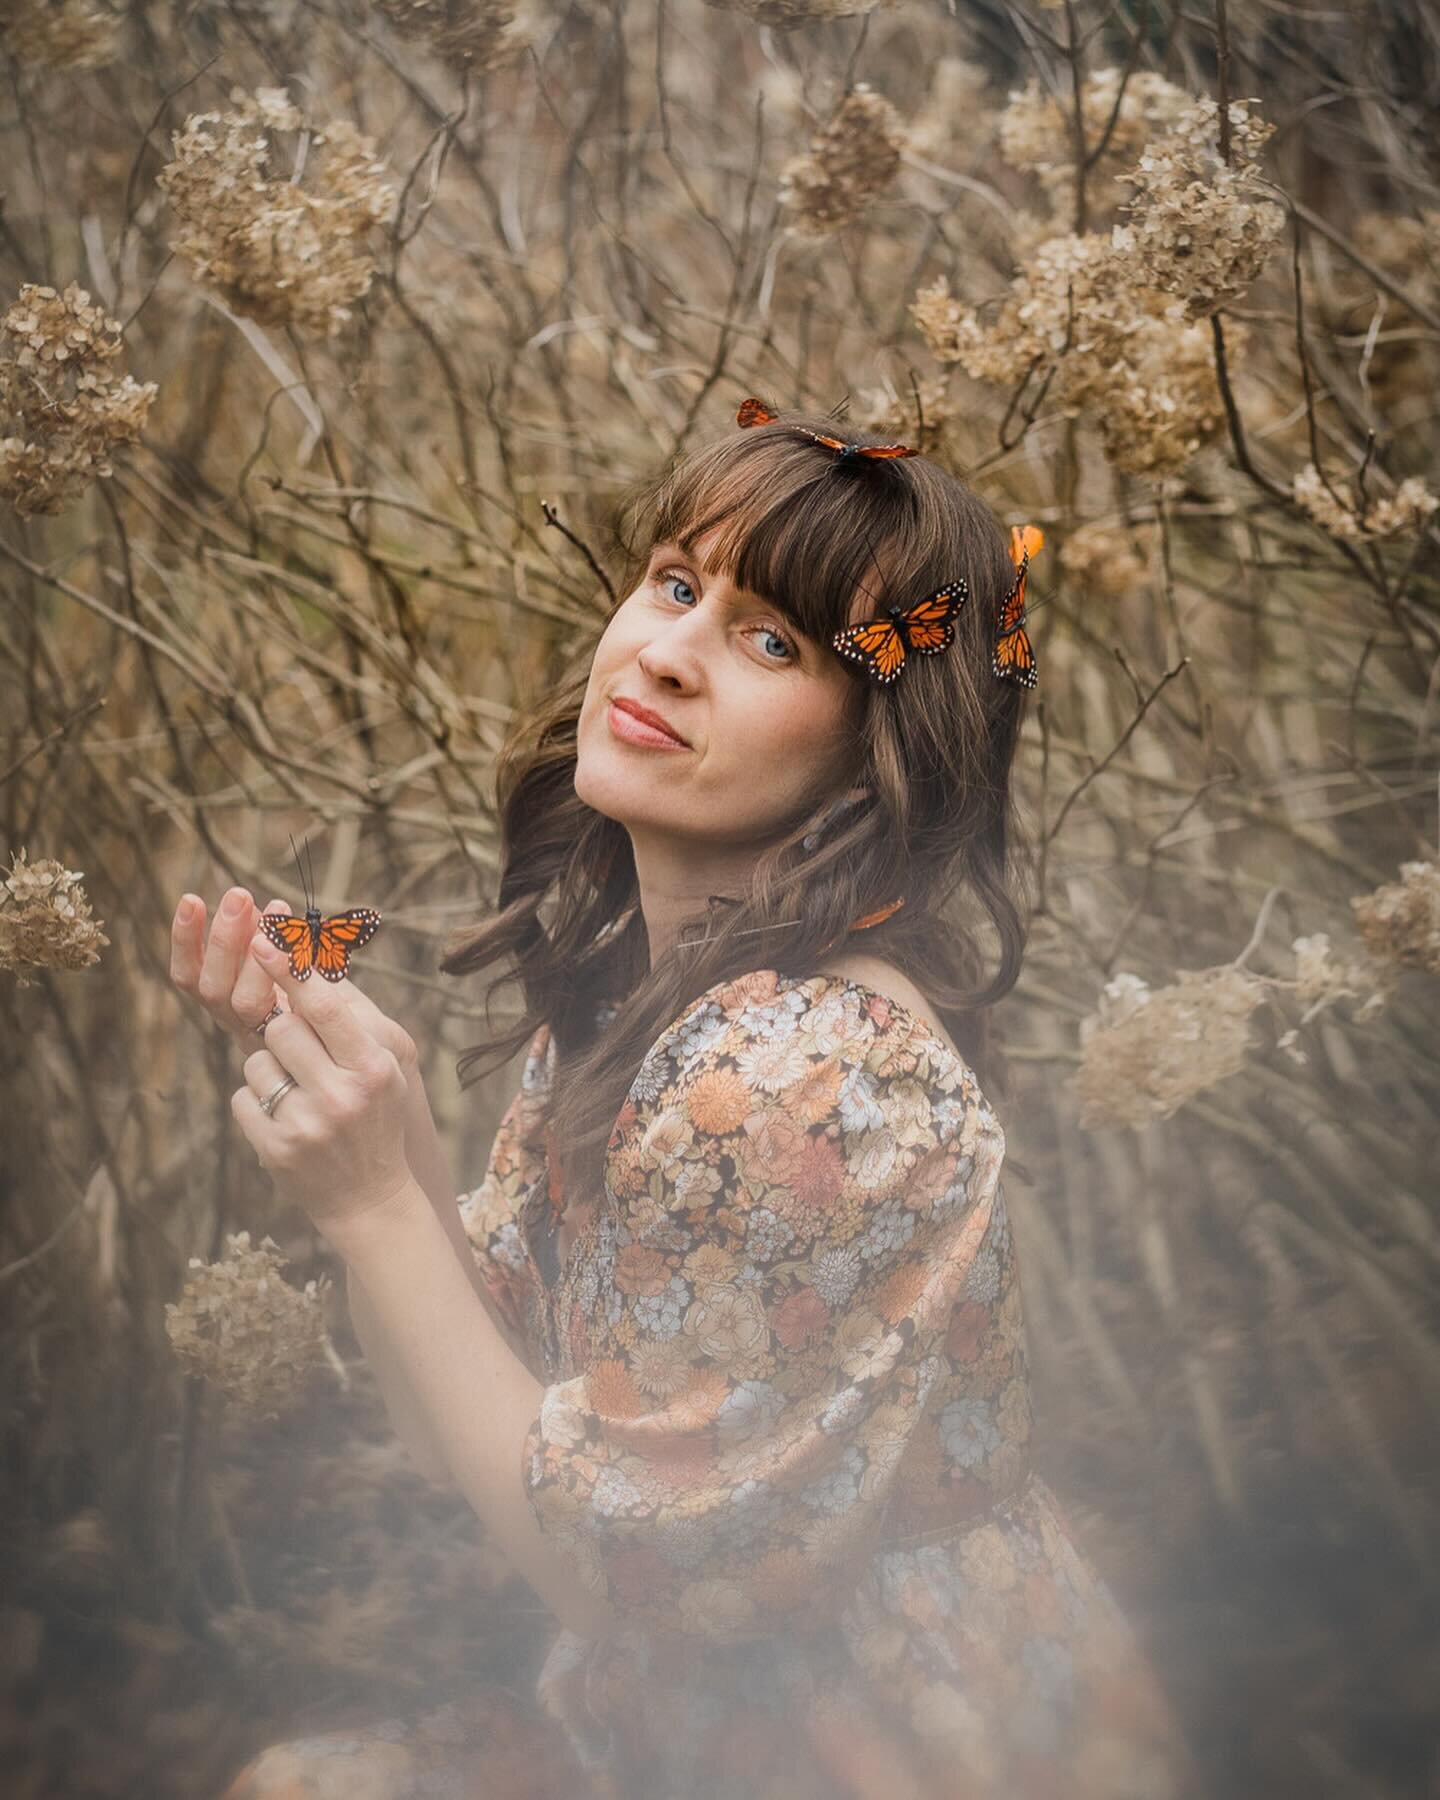 In between winter and spring, a self portrait. As a child I used to catch butterflies and preserve them. My dad is a biologist and gave me a butterfly net and taught me how to carefully press their wings apart without touching them with my fingers. S